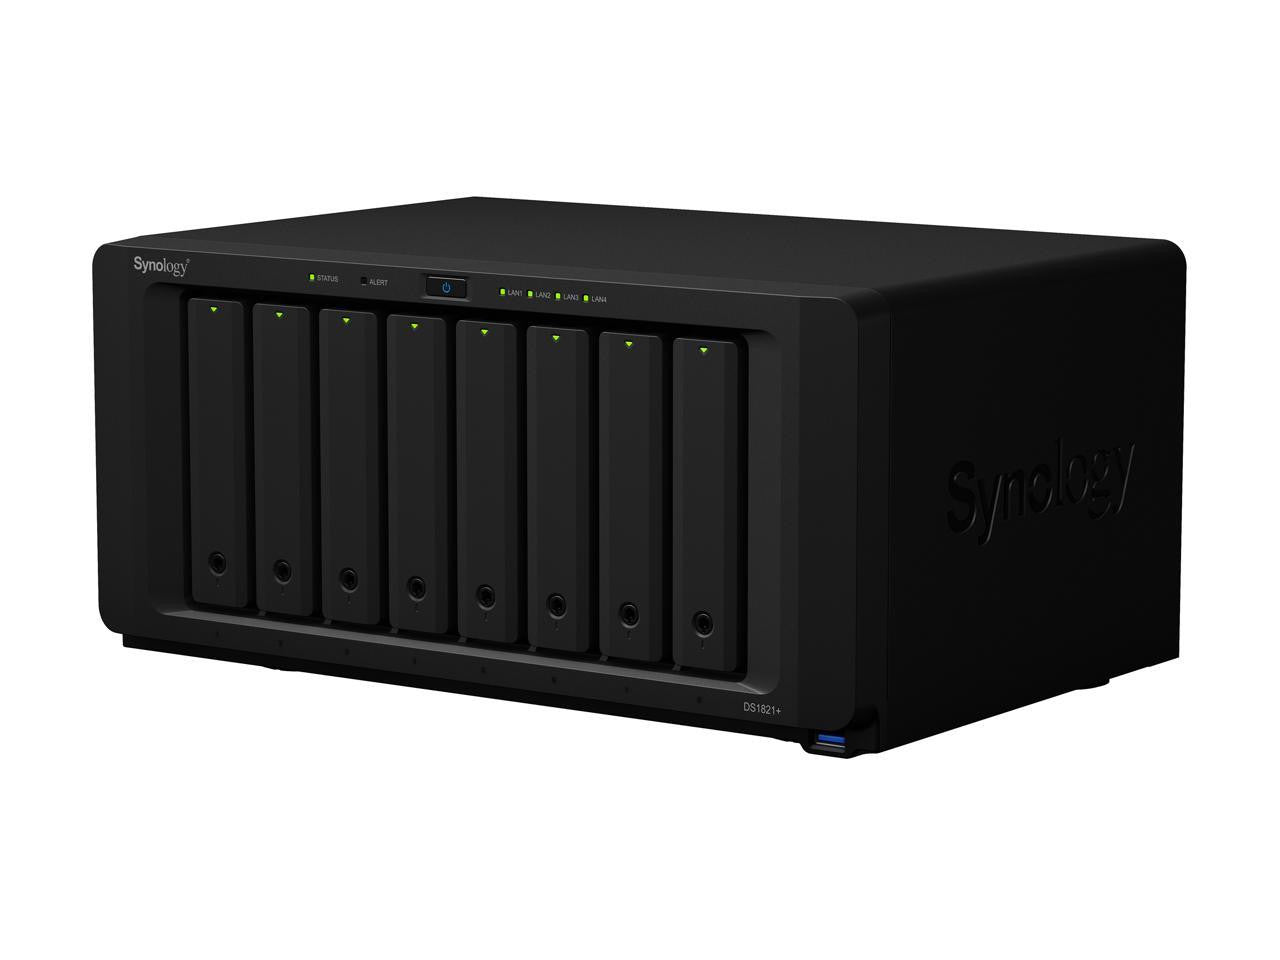 Synology DS1821+ 8-BAY DiskStation with 32GB RAM, 1.6TB (2x800GB) Cache and 64TB (8 x 8TB) of Synology Enterprise HAT5300 Drives Fully Assembled and Tested By CustomTechSales